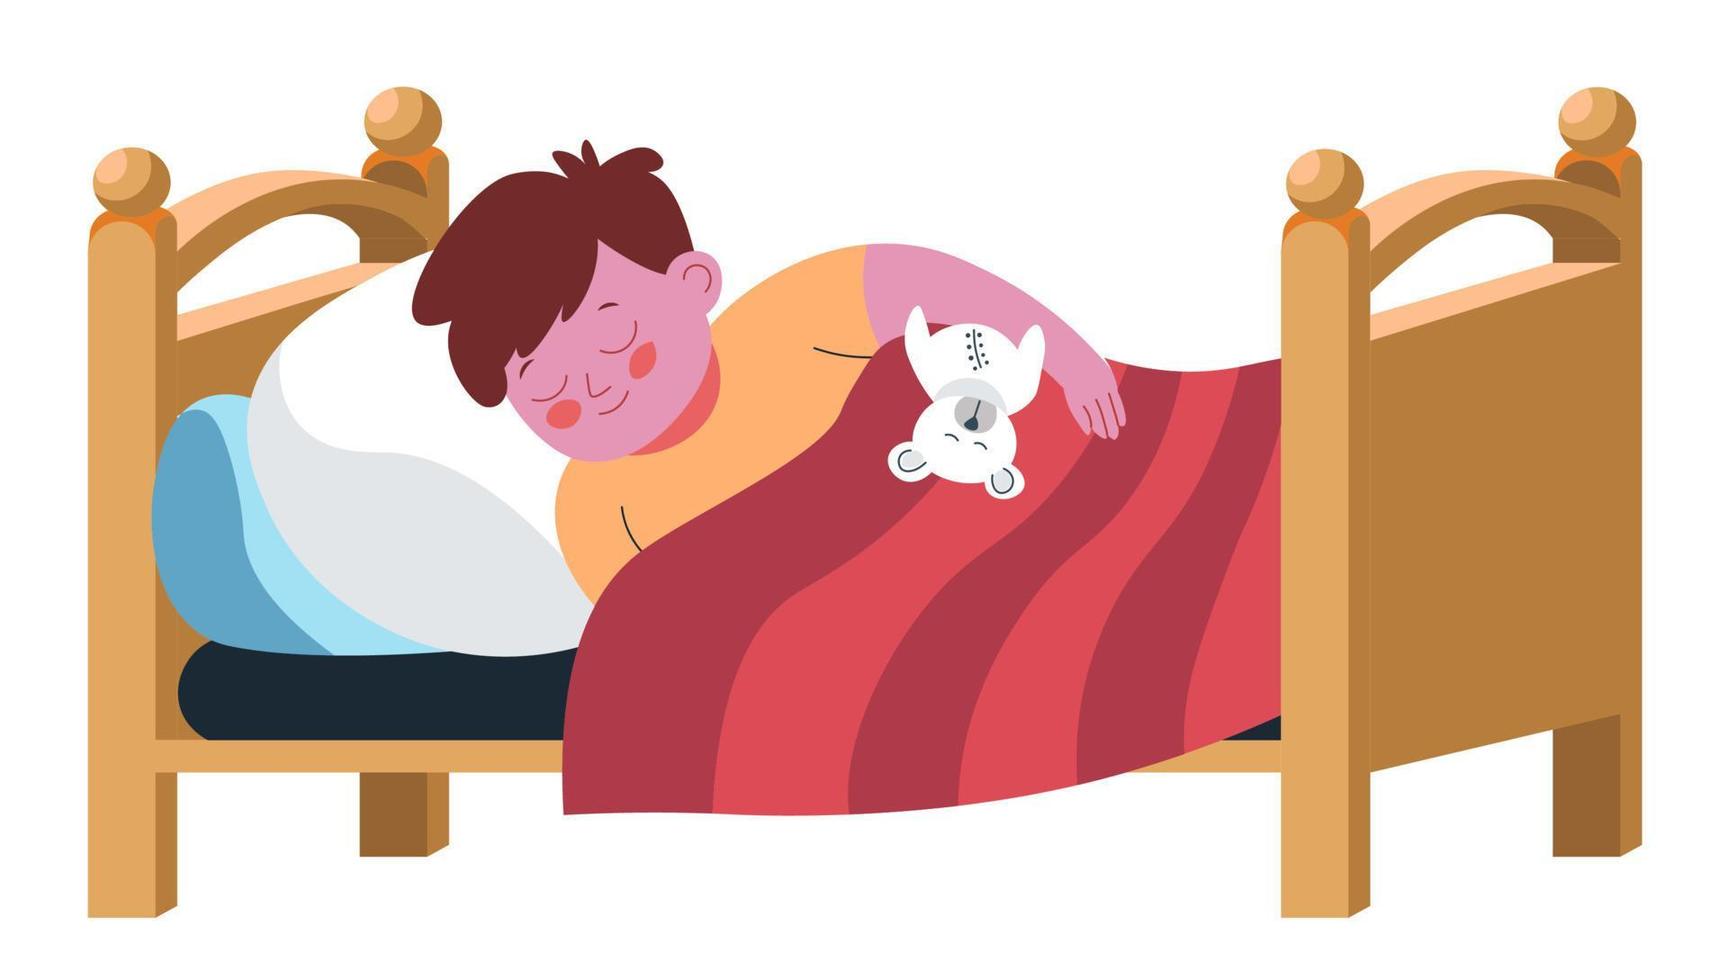 Child boy sleeping in bed, holding toy vector